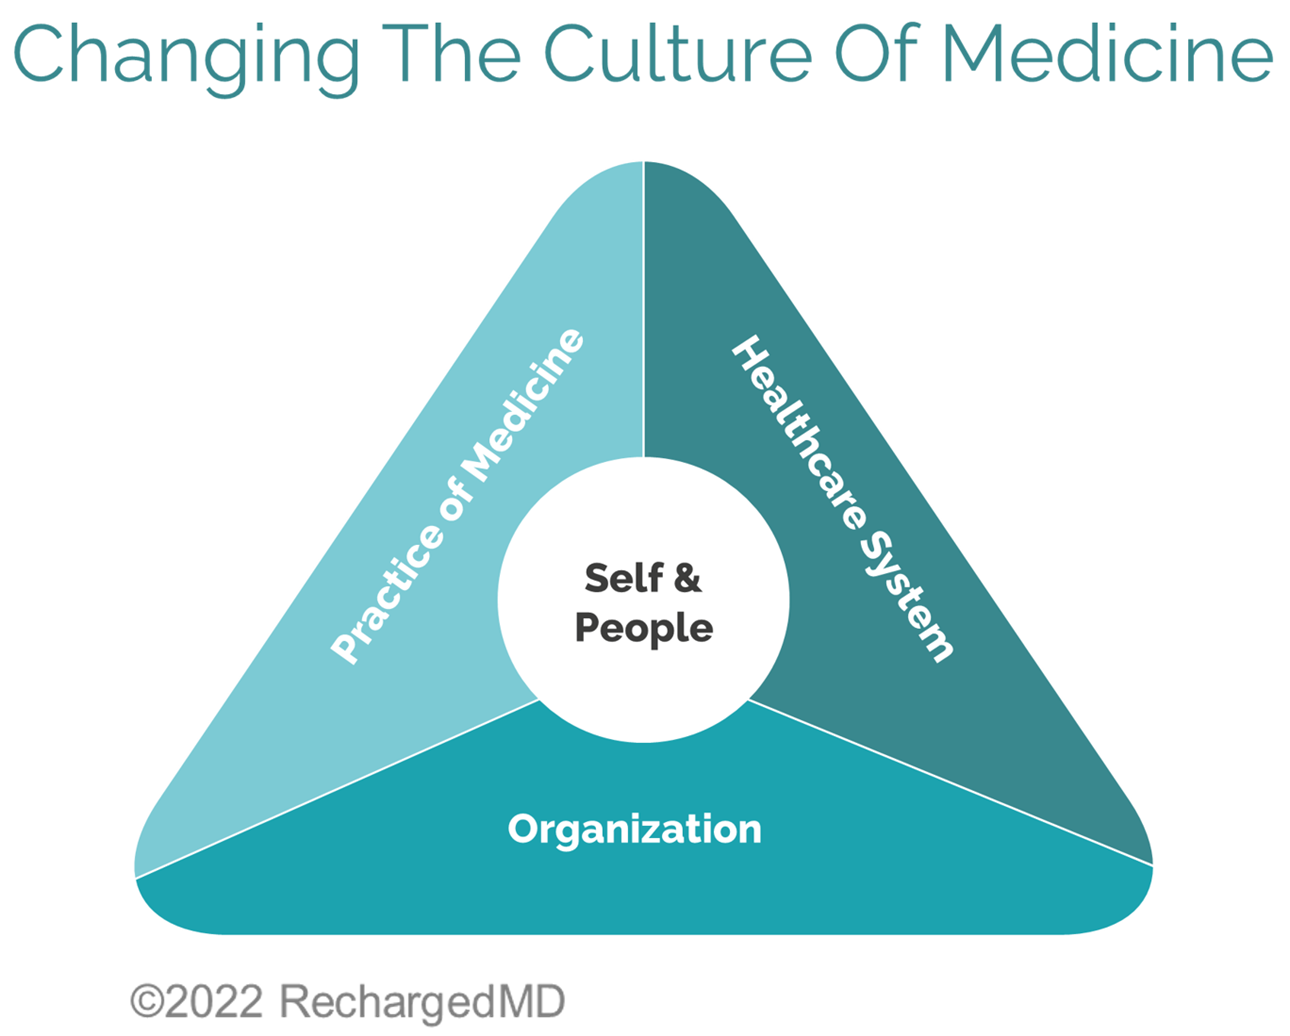 Changing the Culture of Medicine